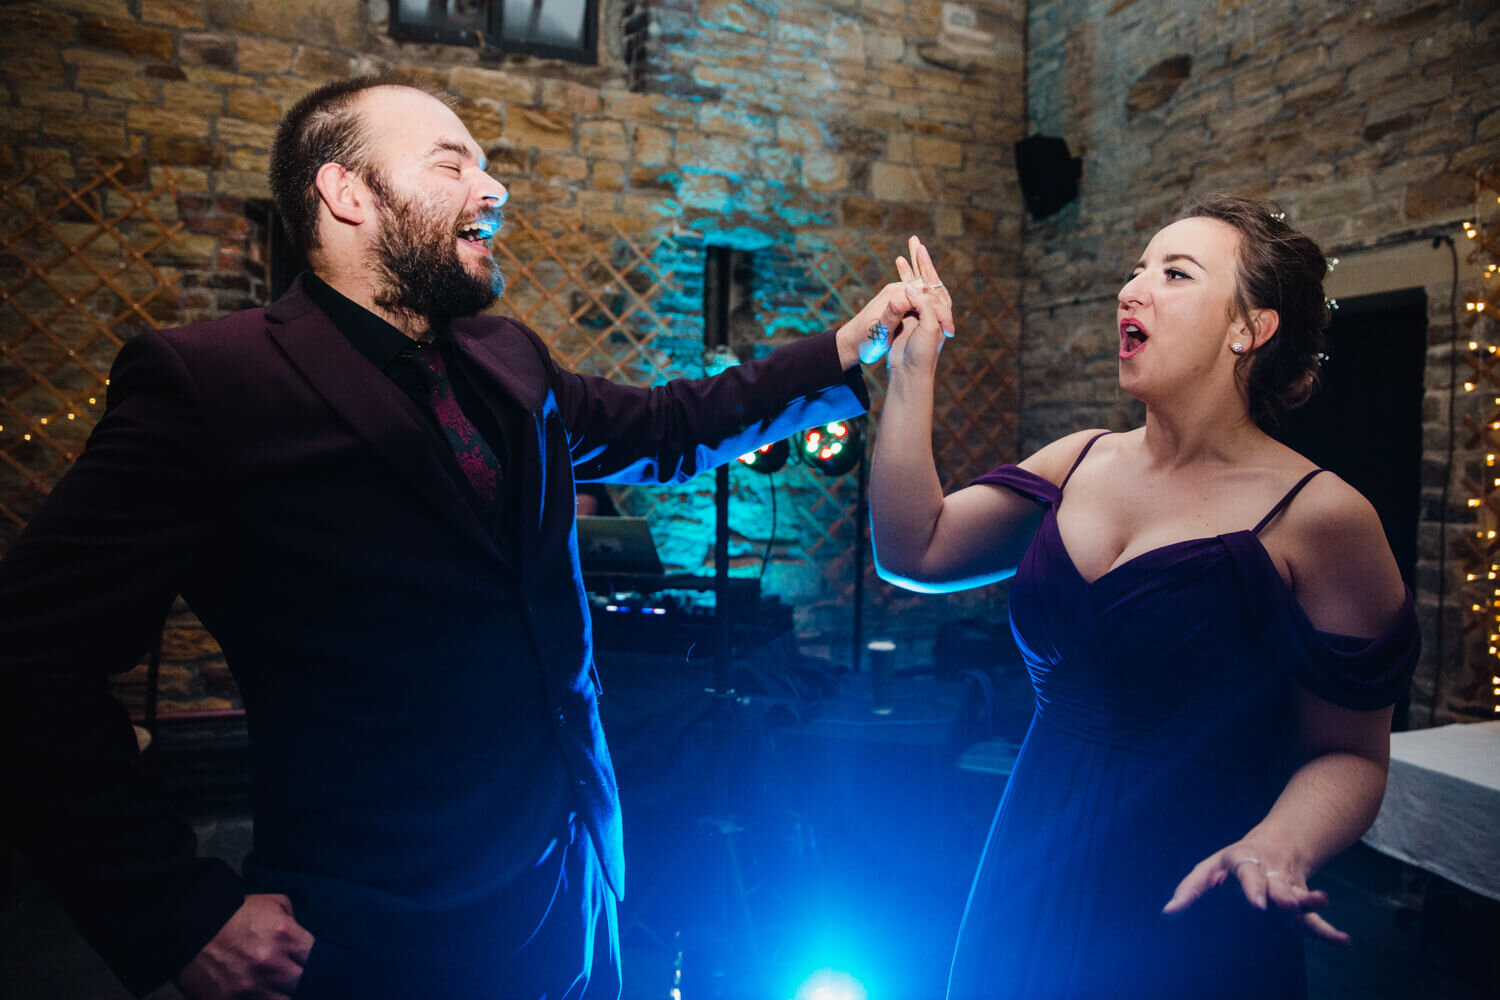 bridesmaid and partner dancing together to music